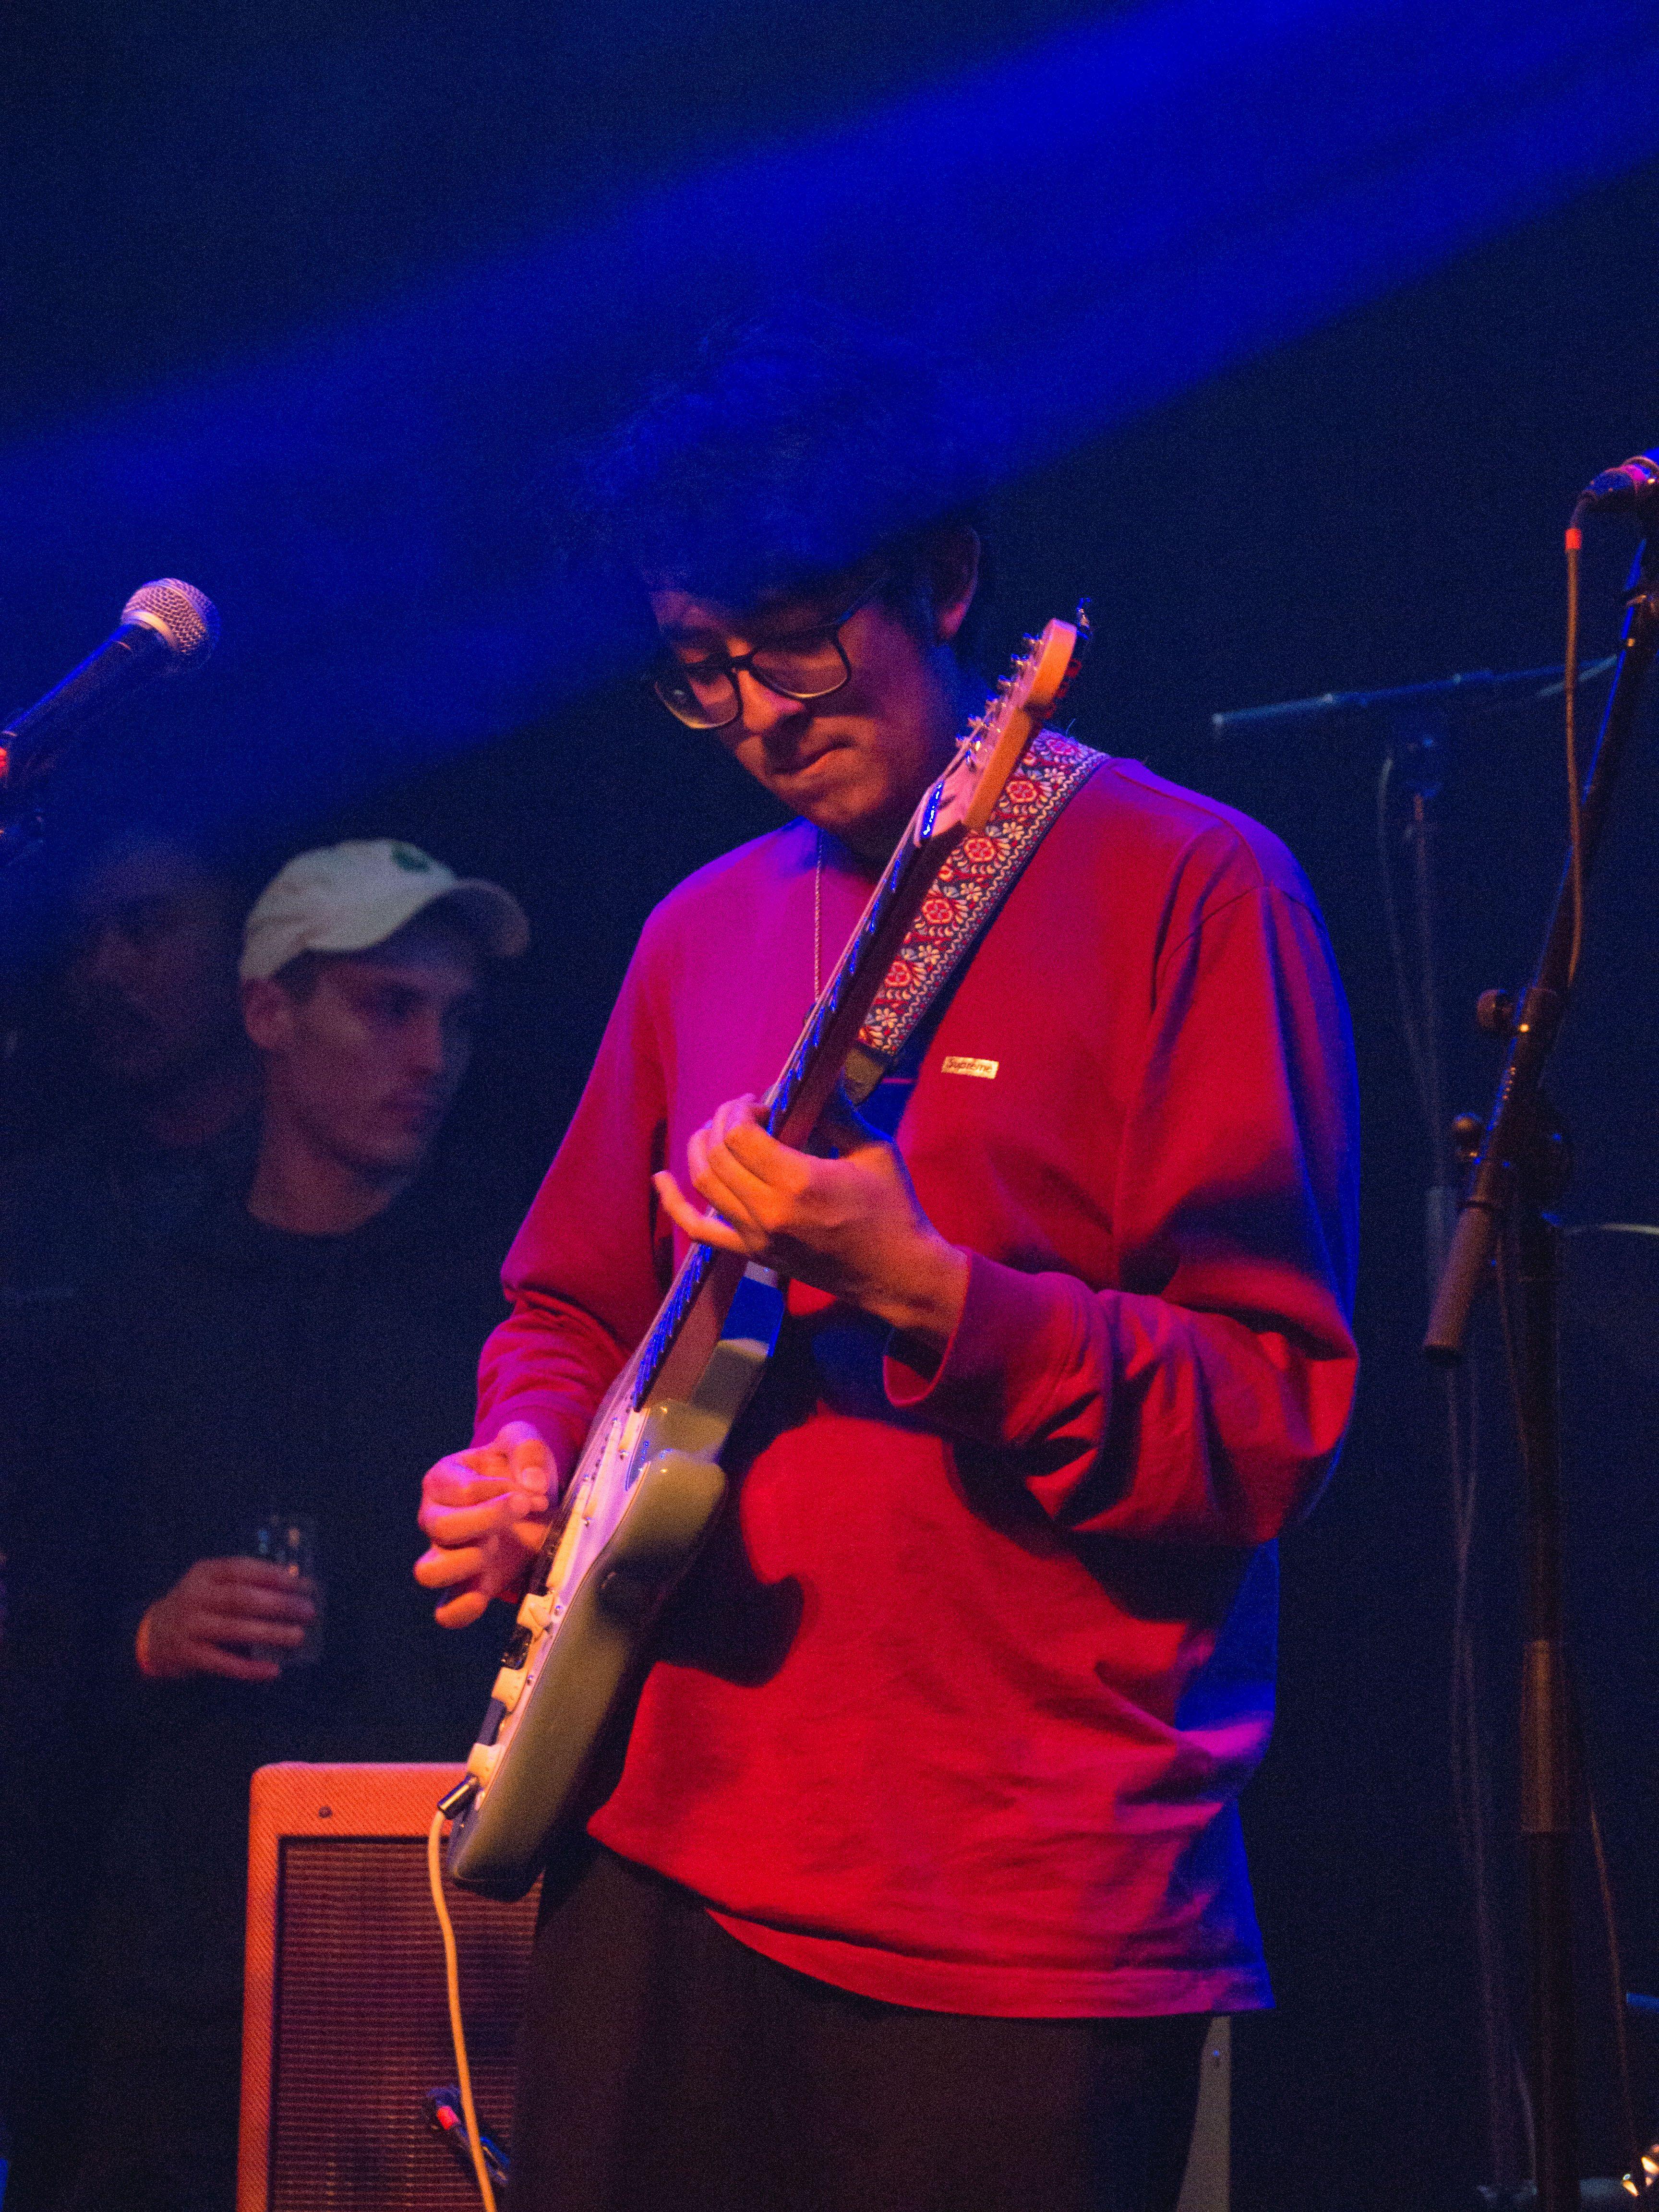 Cuco's First Dallas Performance Inspires Listeners